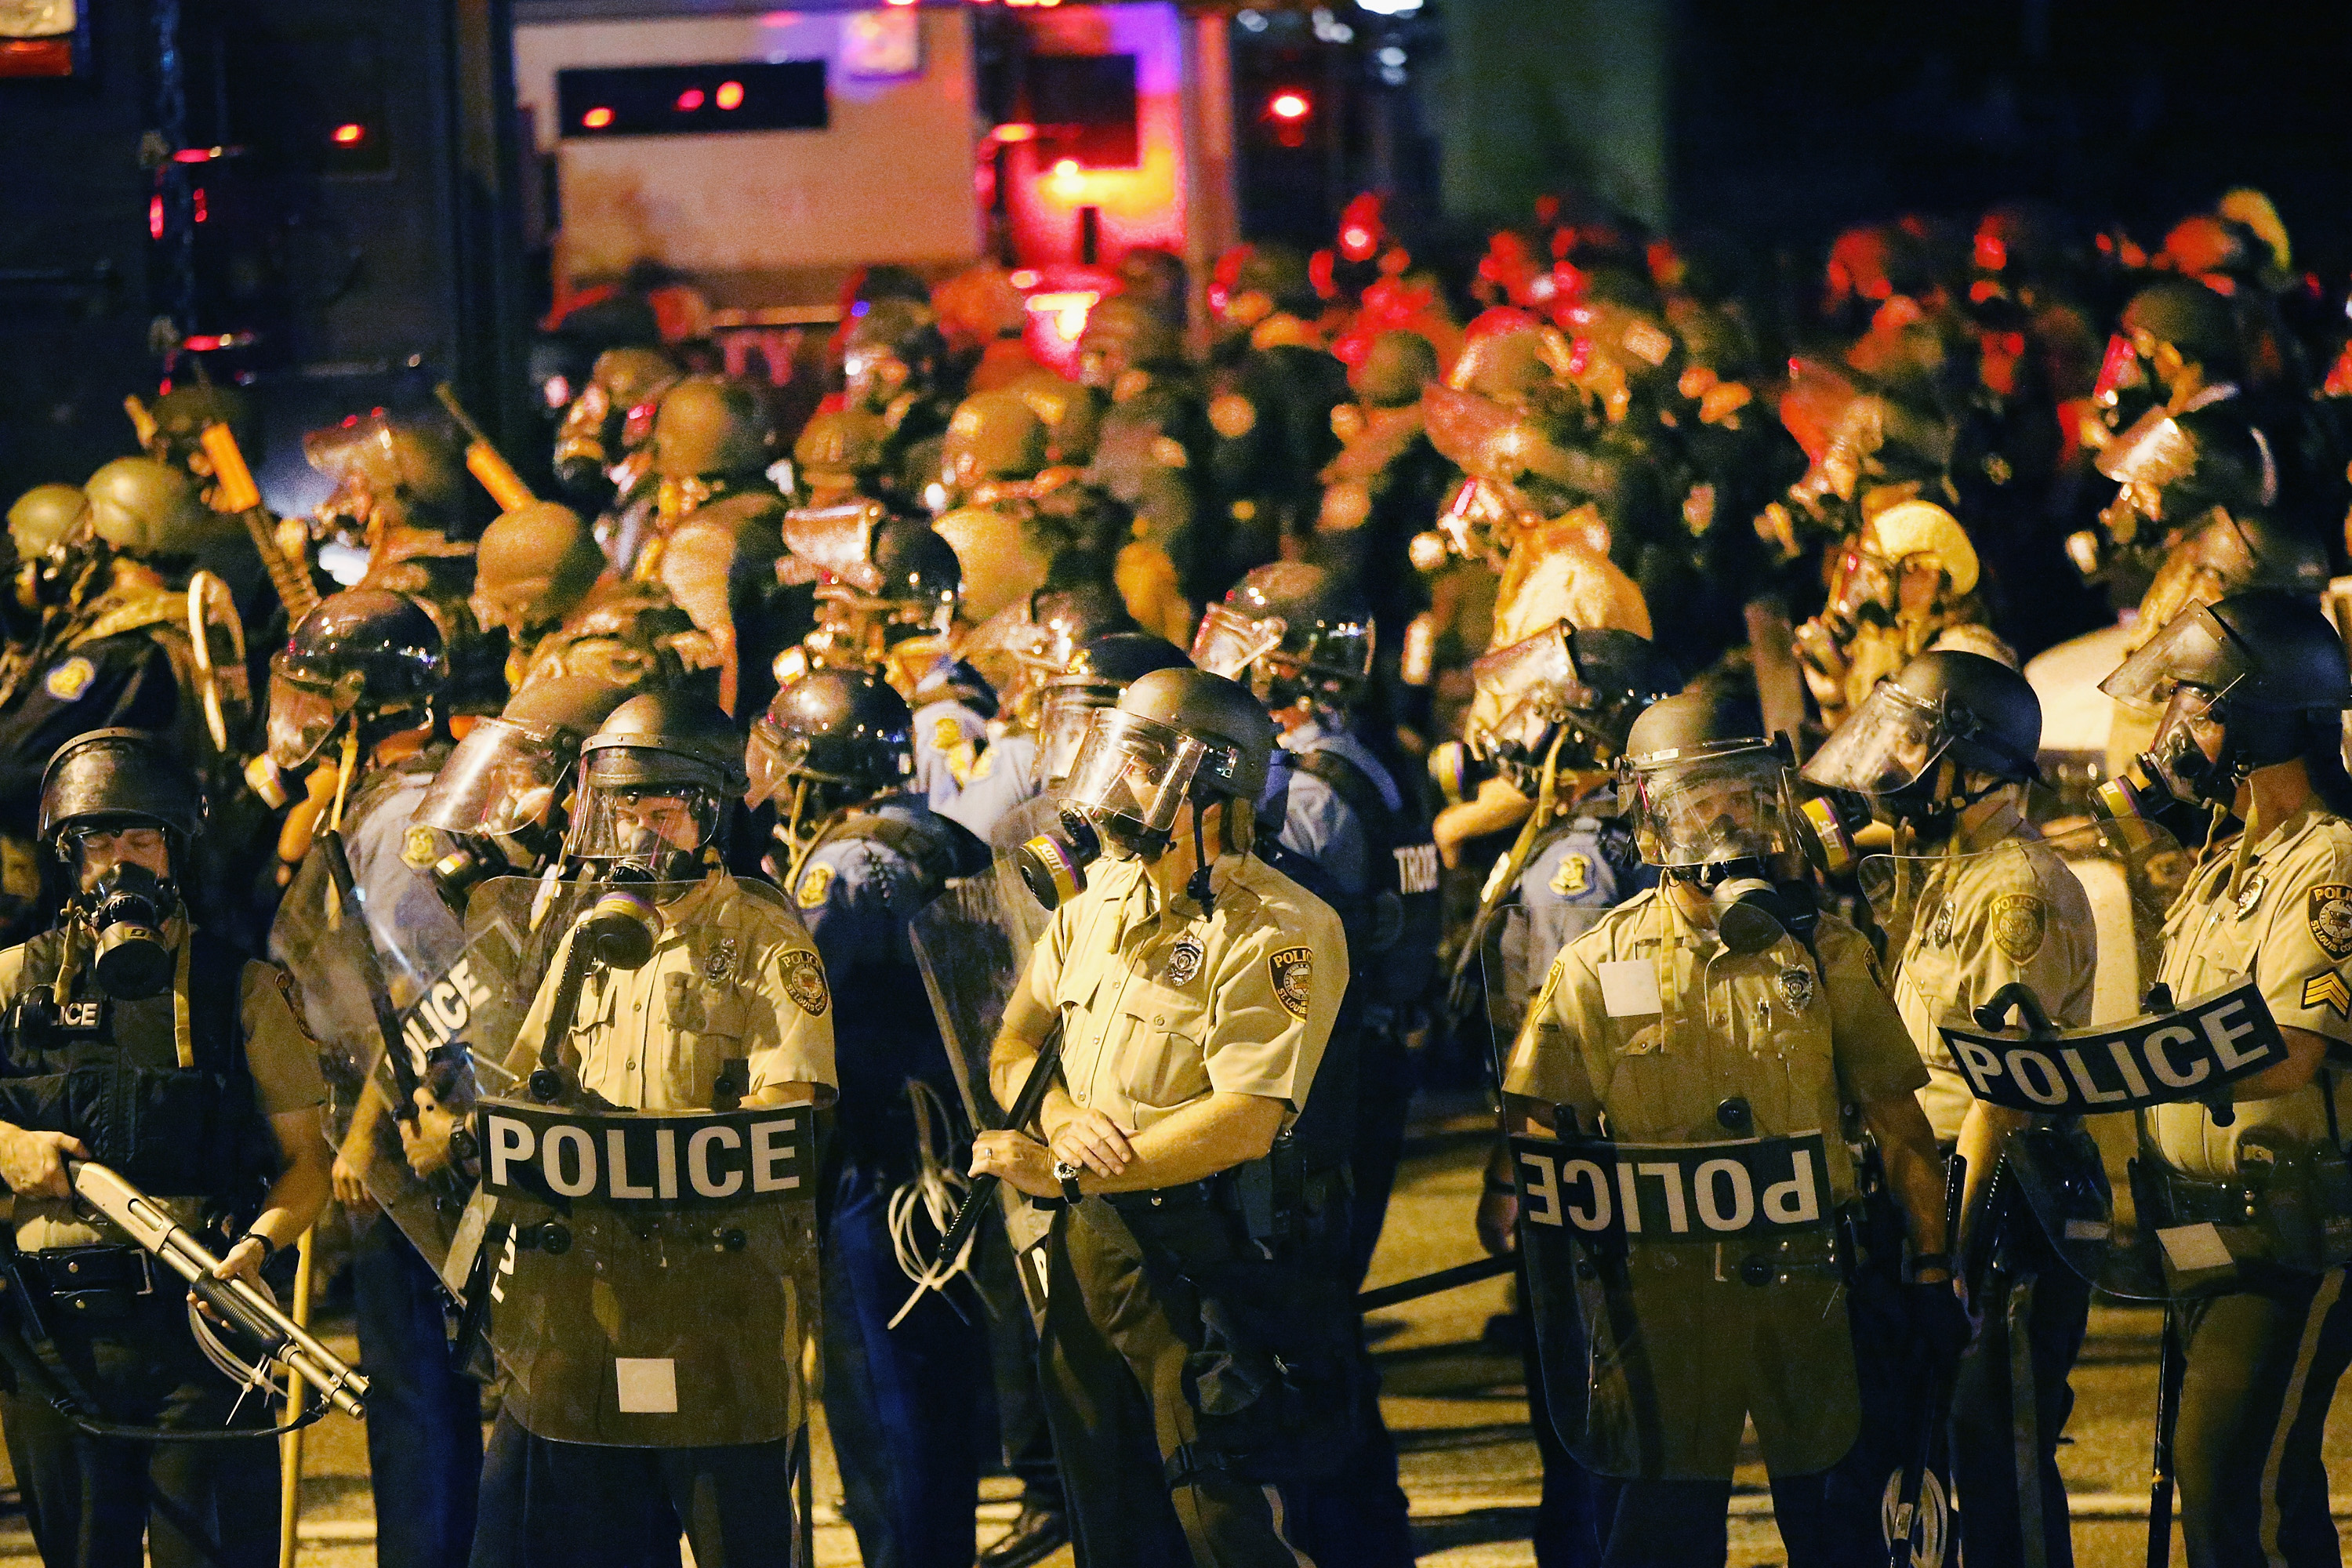 Police advance on demonstrators protesting the killing of teenager Michael Brown on August 17, 2014 in Ferguson, Missouri. (Scott Olson—Getty Images)